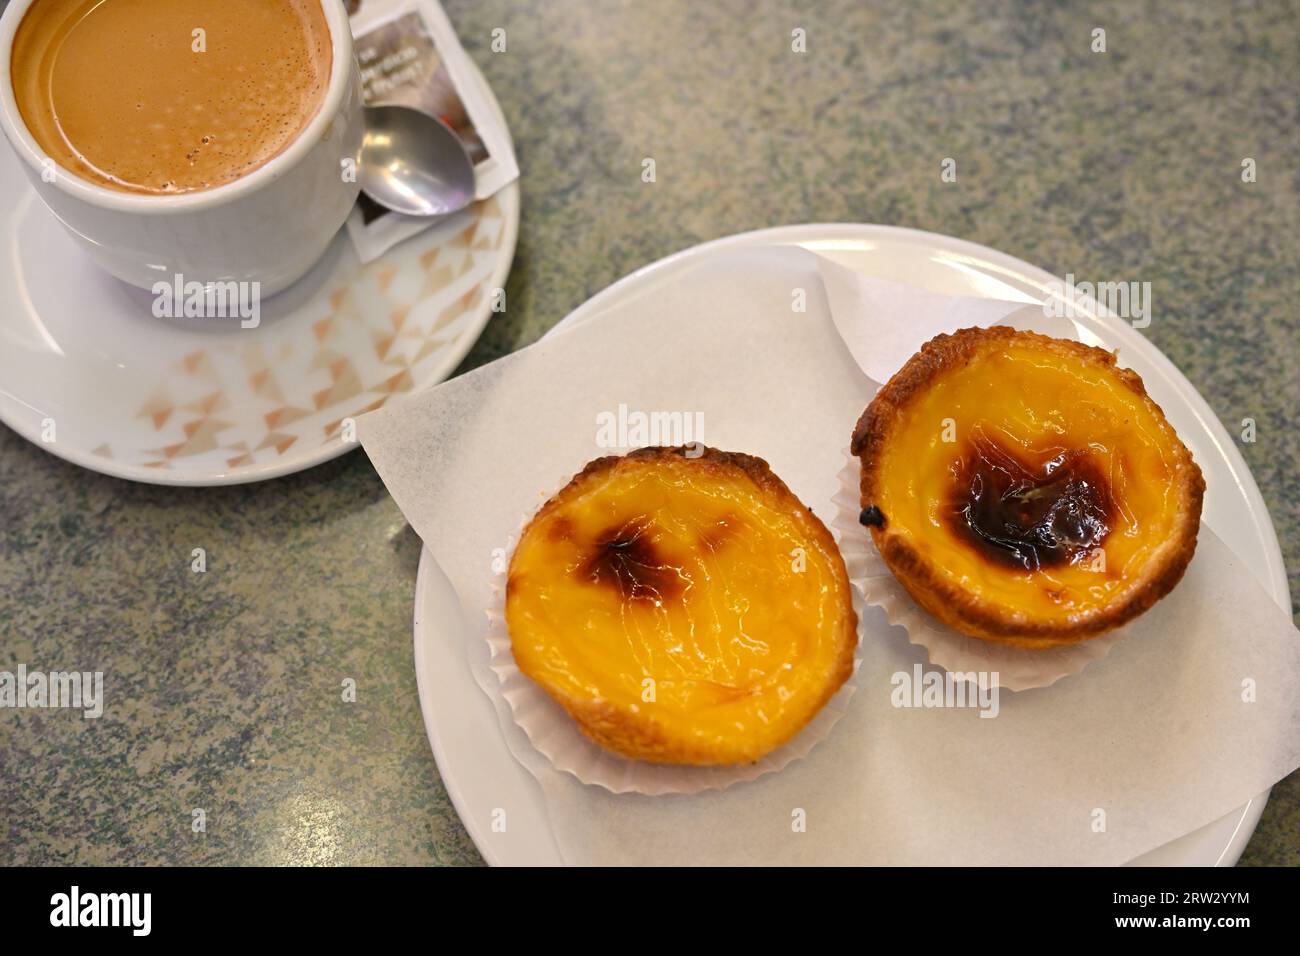 Two traditional Portuguese egg tart pastries, Pastel de Nata, with cup of coffee Stock Photo